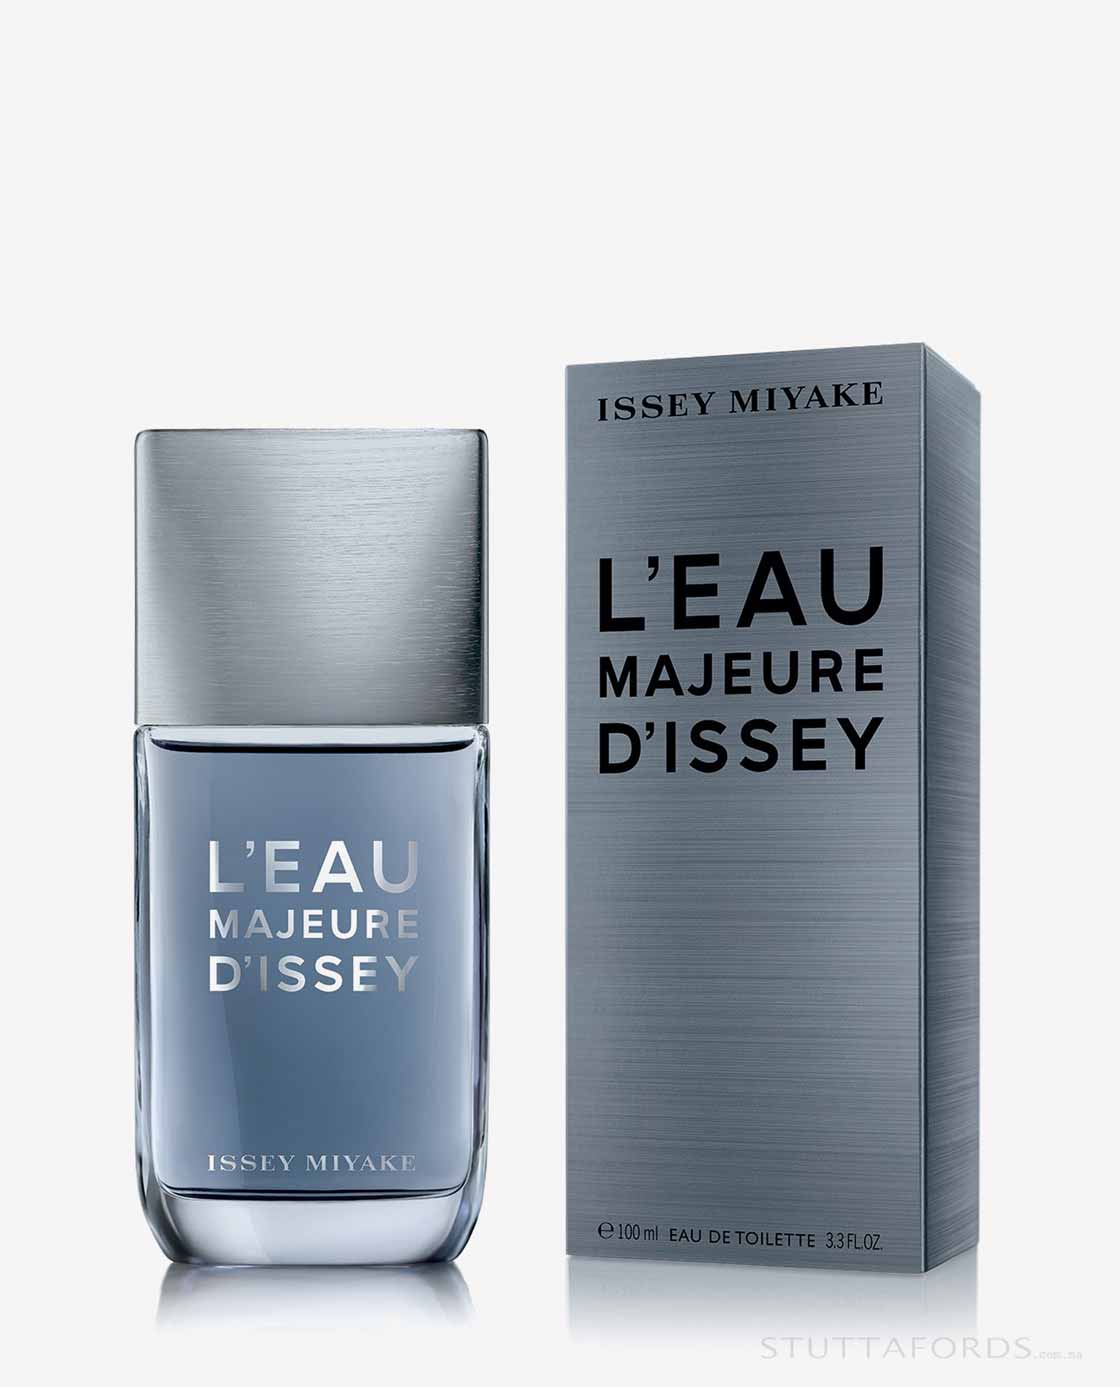 ISSY MIYAKE – L’EAU MAJEURE D’ISSEY EDT 100mL